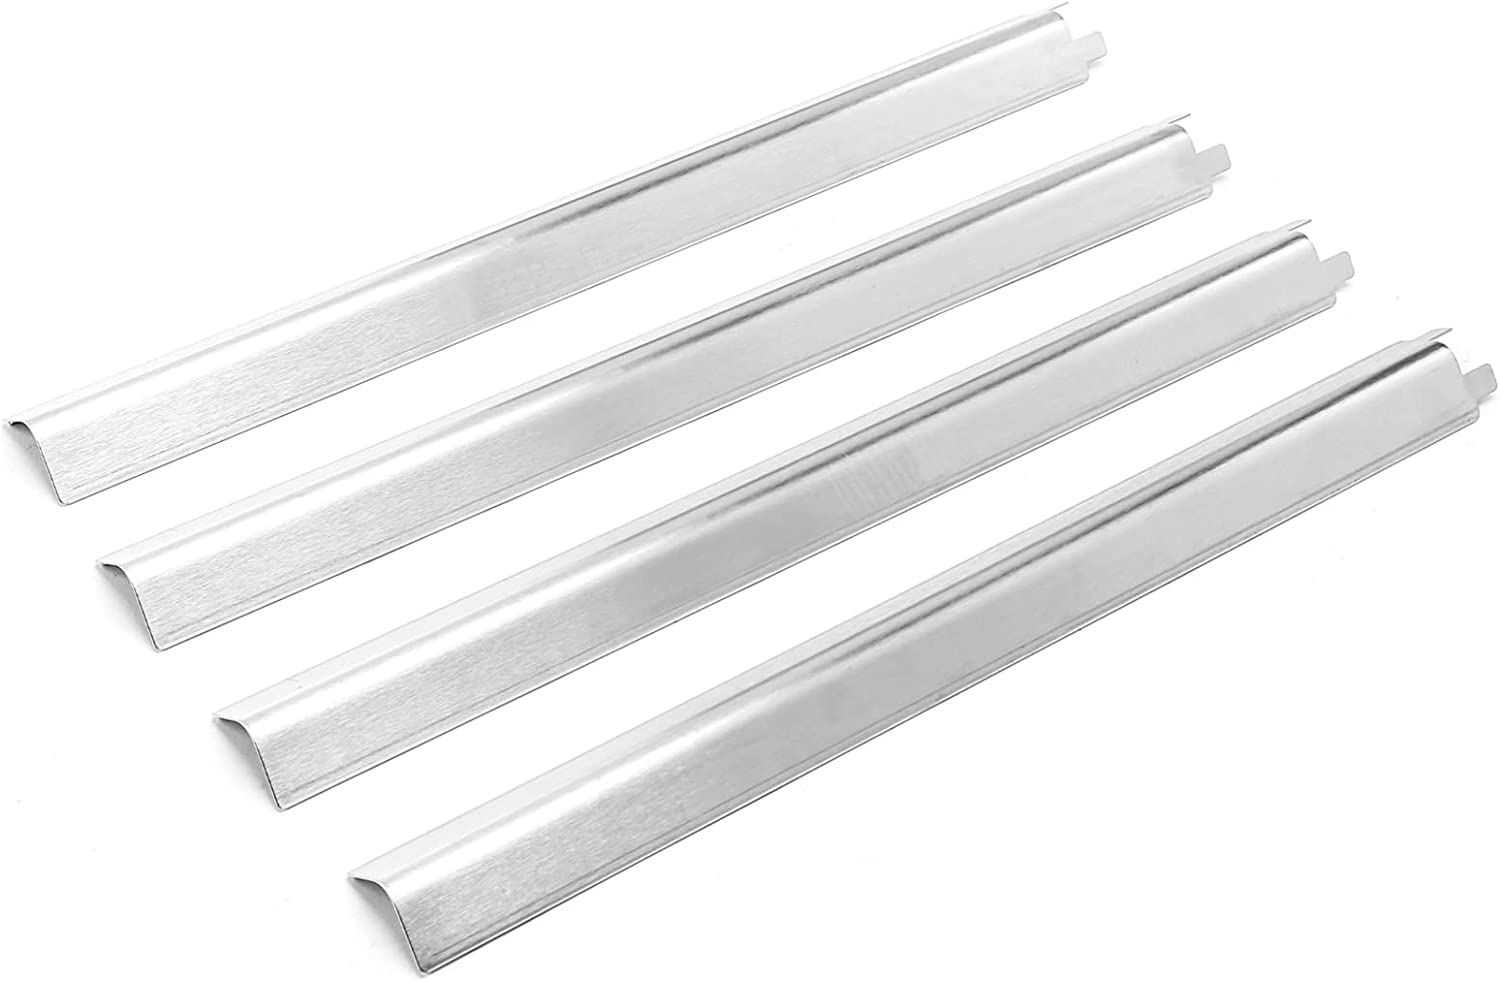 Hisencn Heat Plates Replacement Parts Fits Charbroil Performance Series 4-Burner 463365021 463351021 463352521 463330521 463448021 Gas Grill Stainless Steel Heat Shields Tents, Burner Covers 4 Pack - image 1 of 13